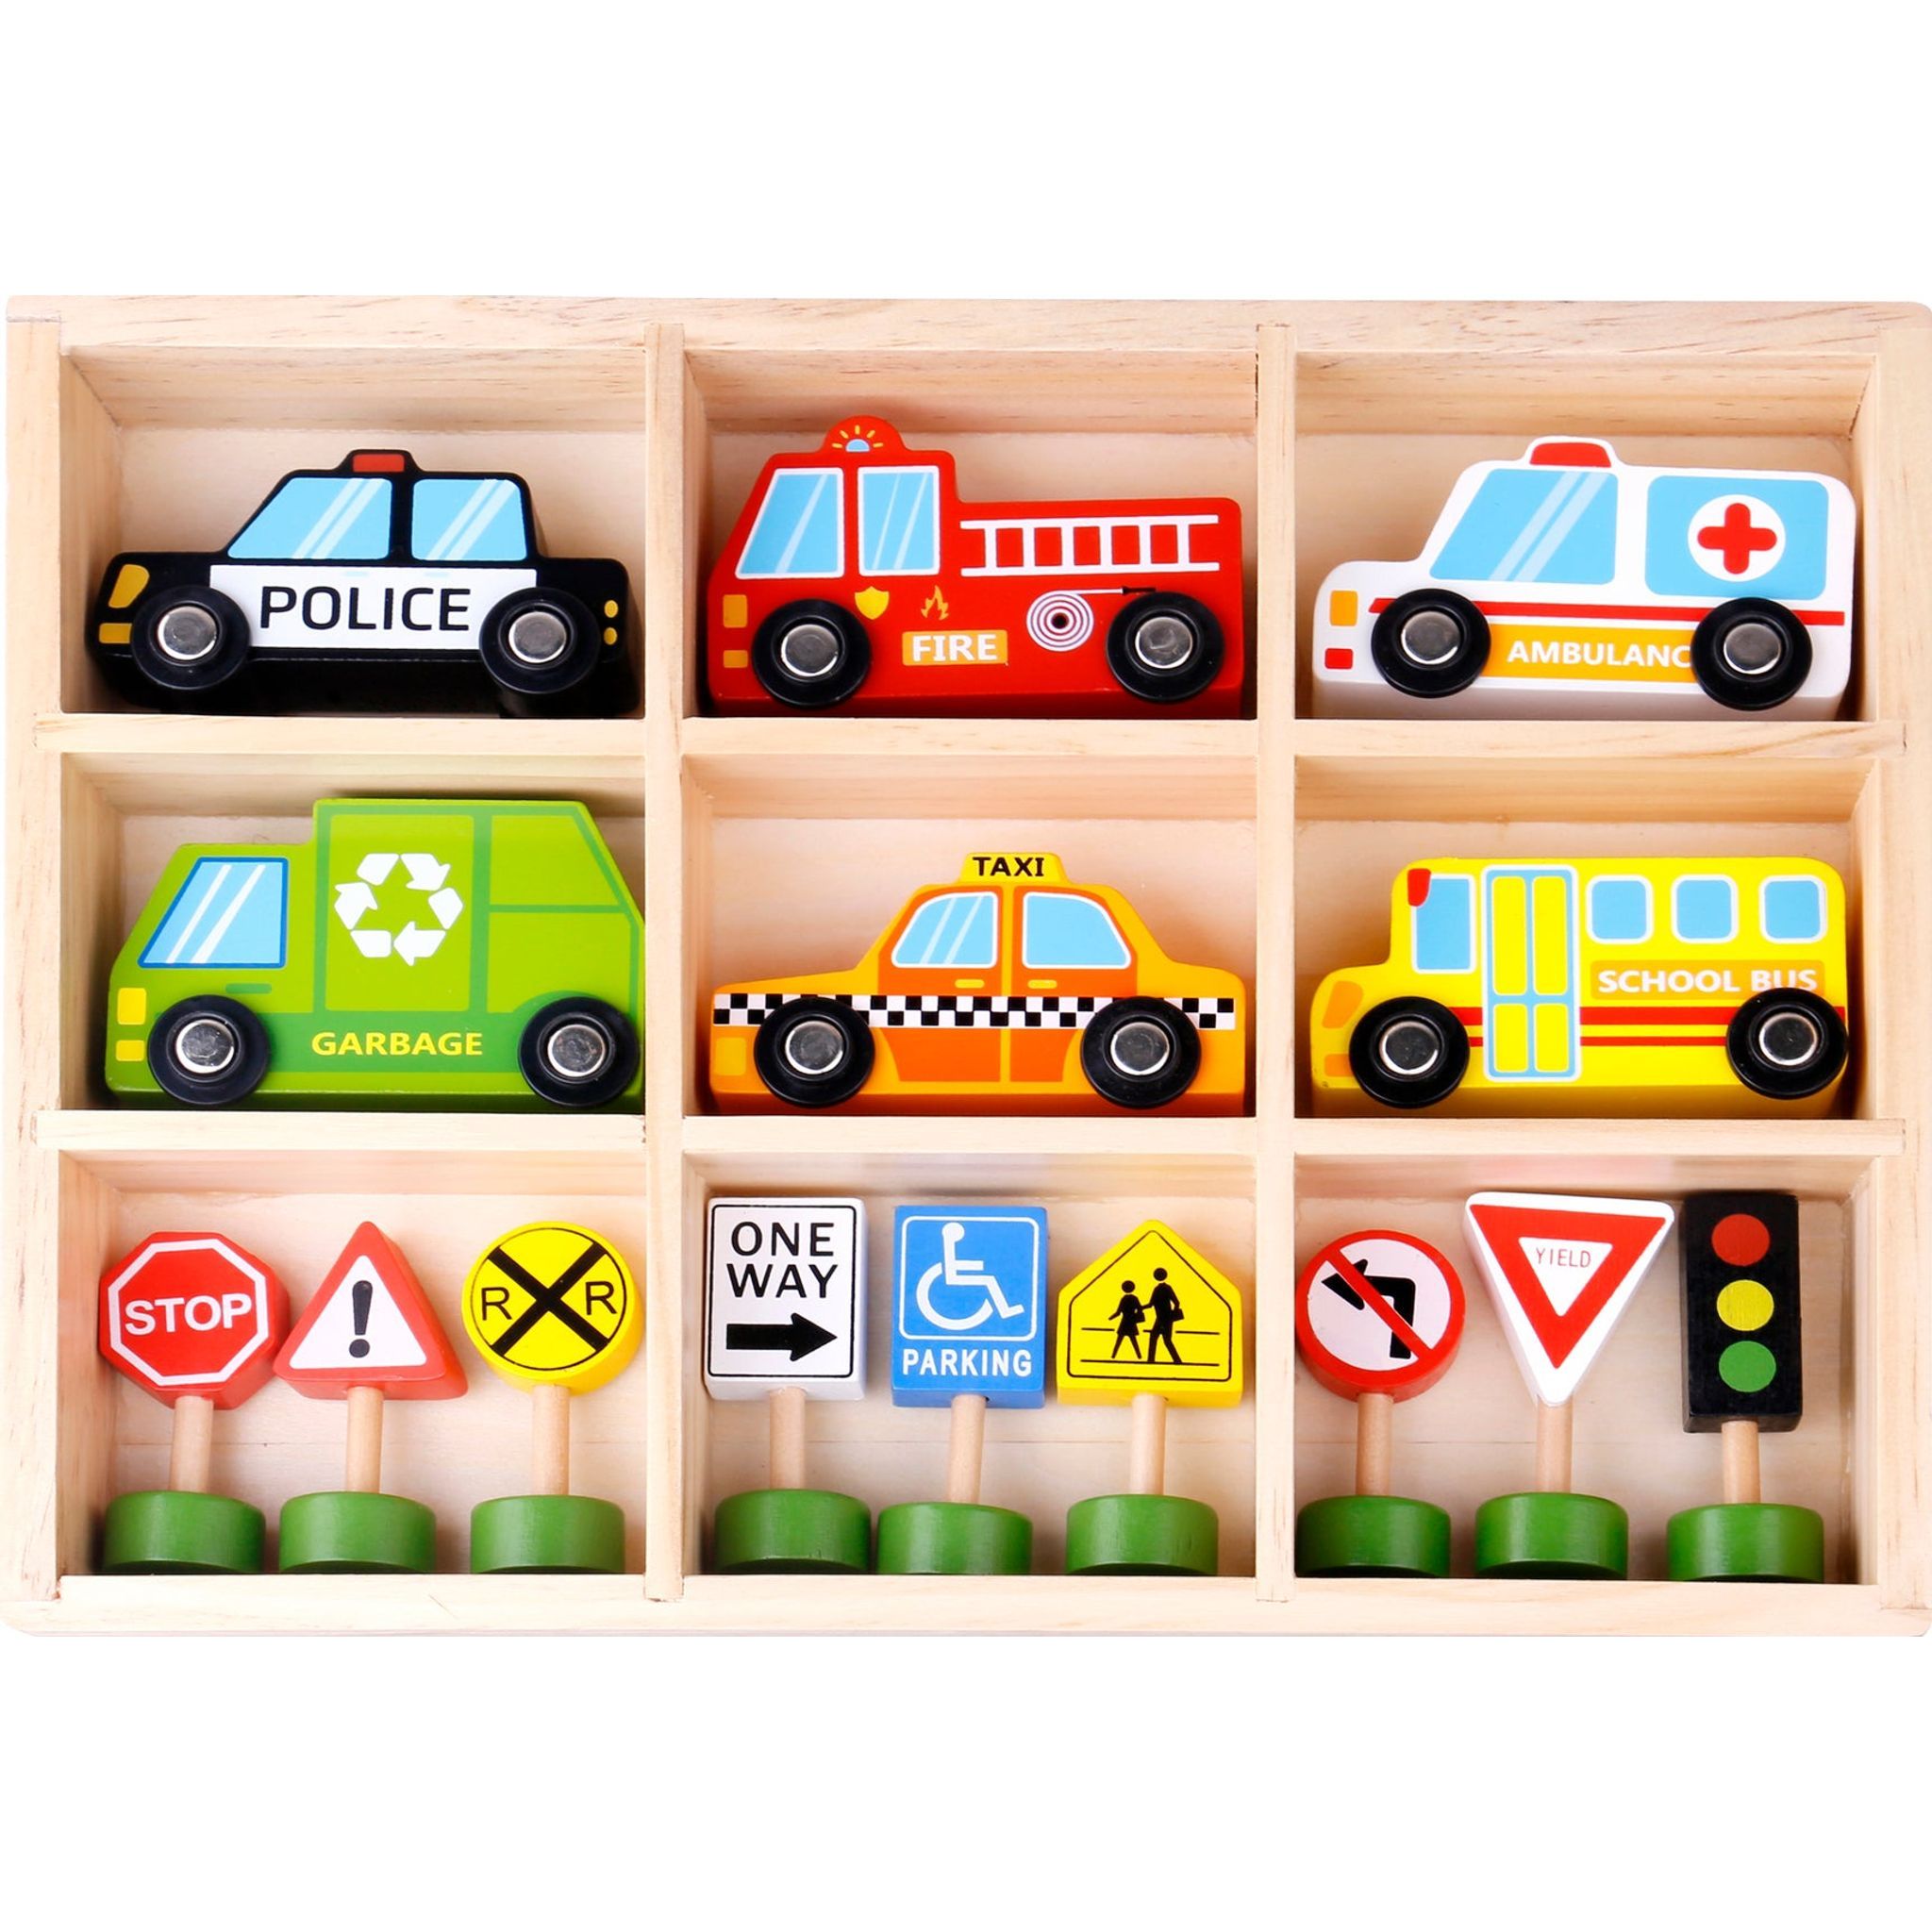 Transportation Vehicles & Street Signs - Toybox Tales